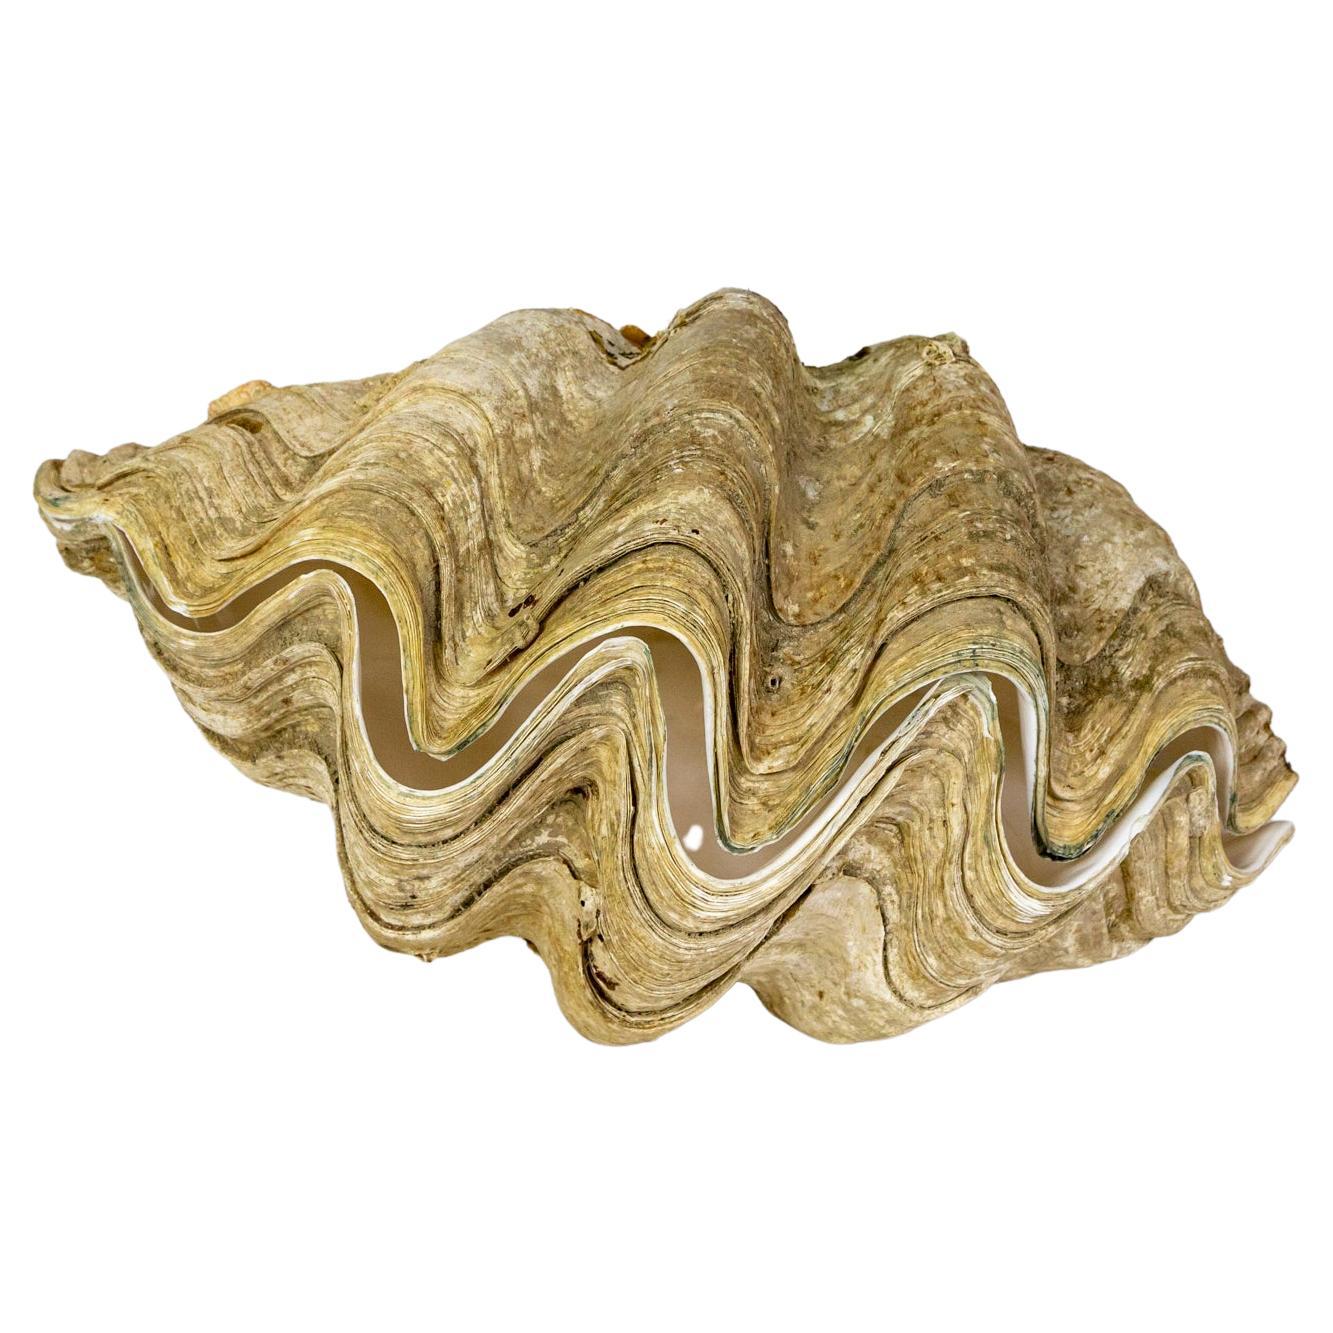 Complete Giant Clam Shell Specimen Tridacna 